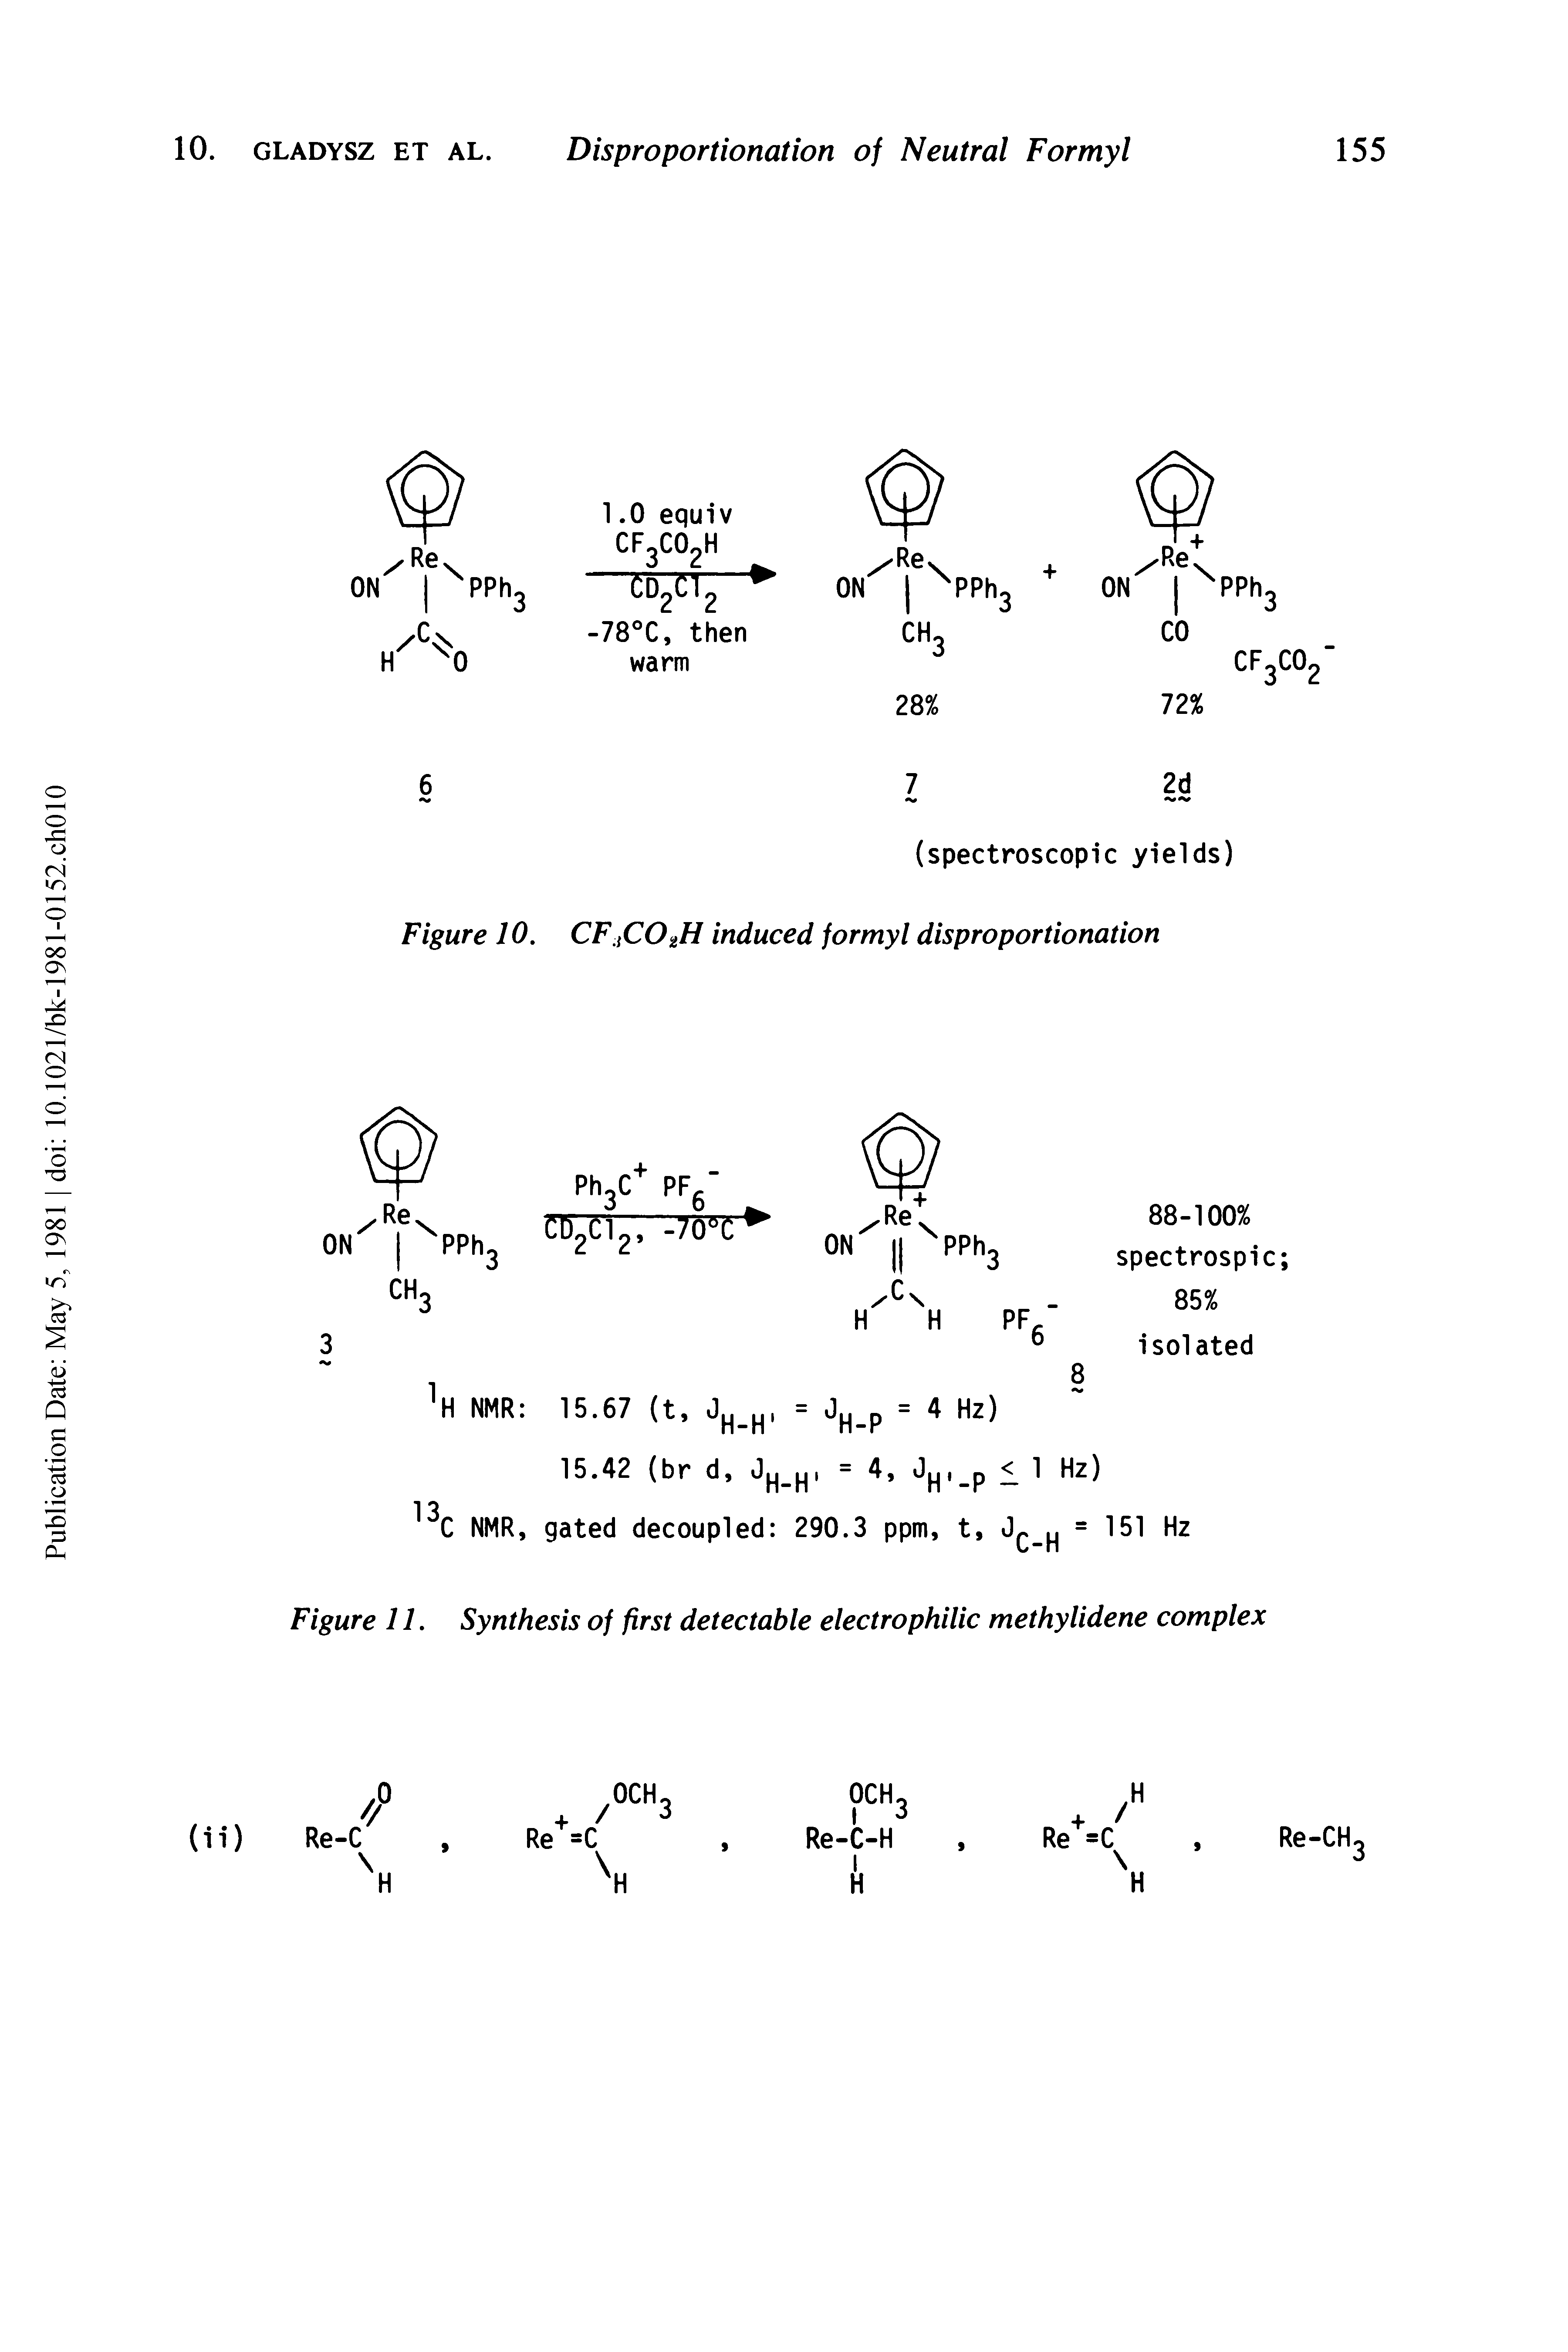 Figure 11. Synthesis of first detectable electrophilic methylidene complex...